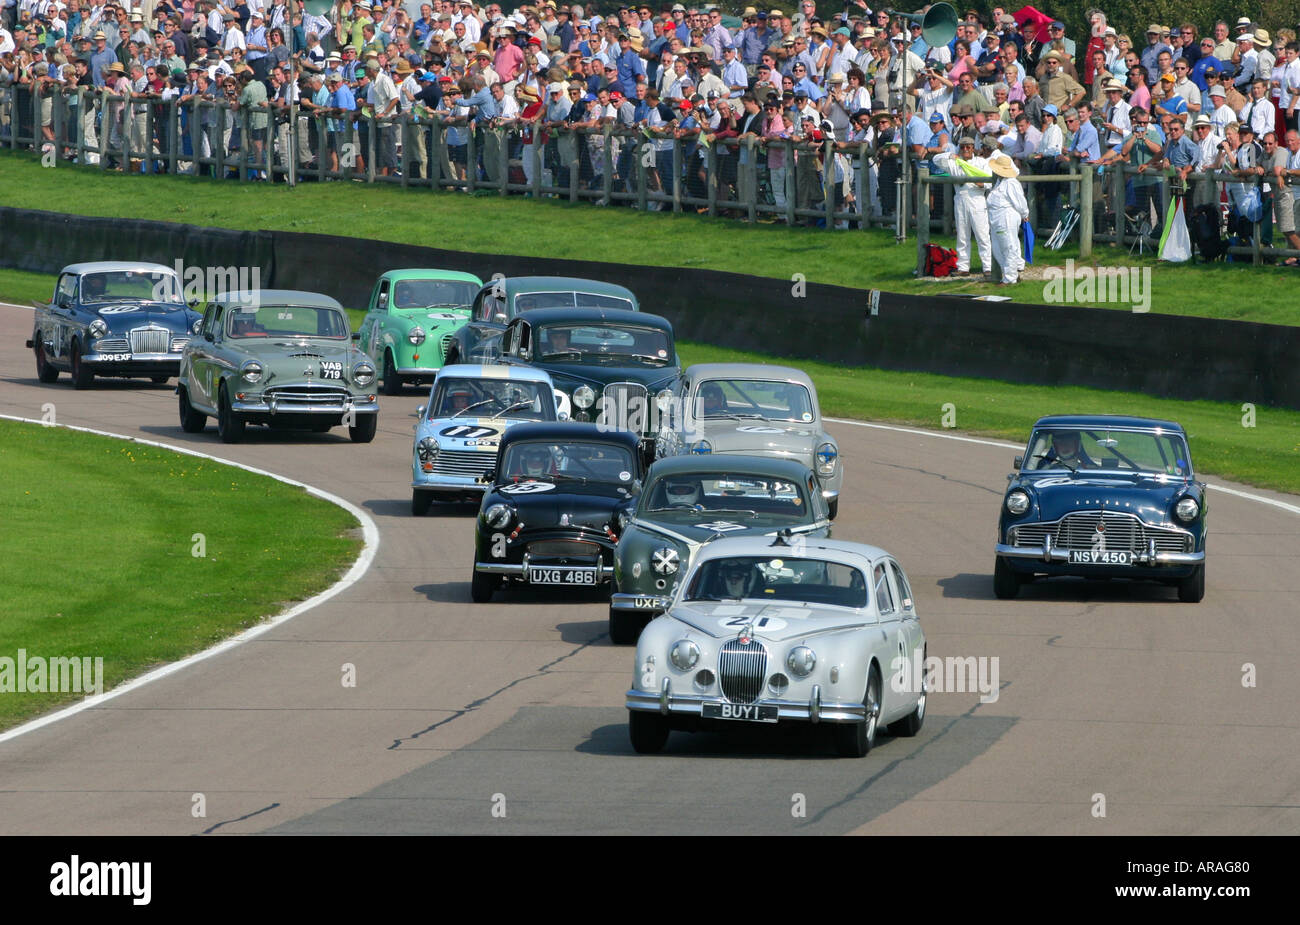 St Marys Trophy gara a Goodwood, Sussex, Regno Unito. Foto Stock